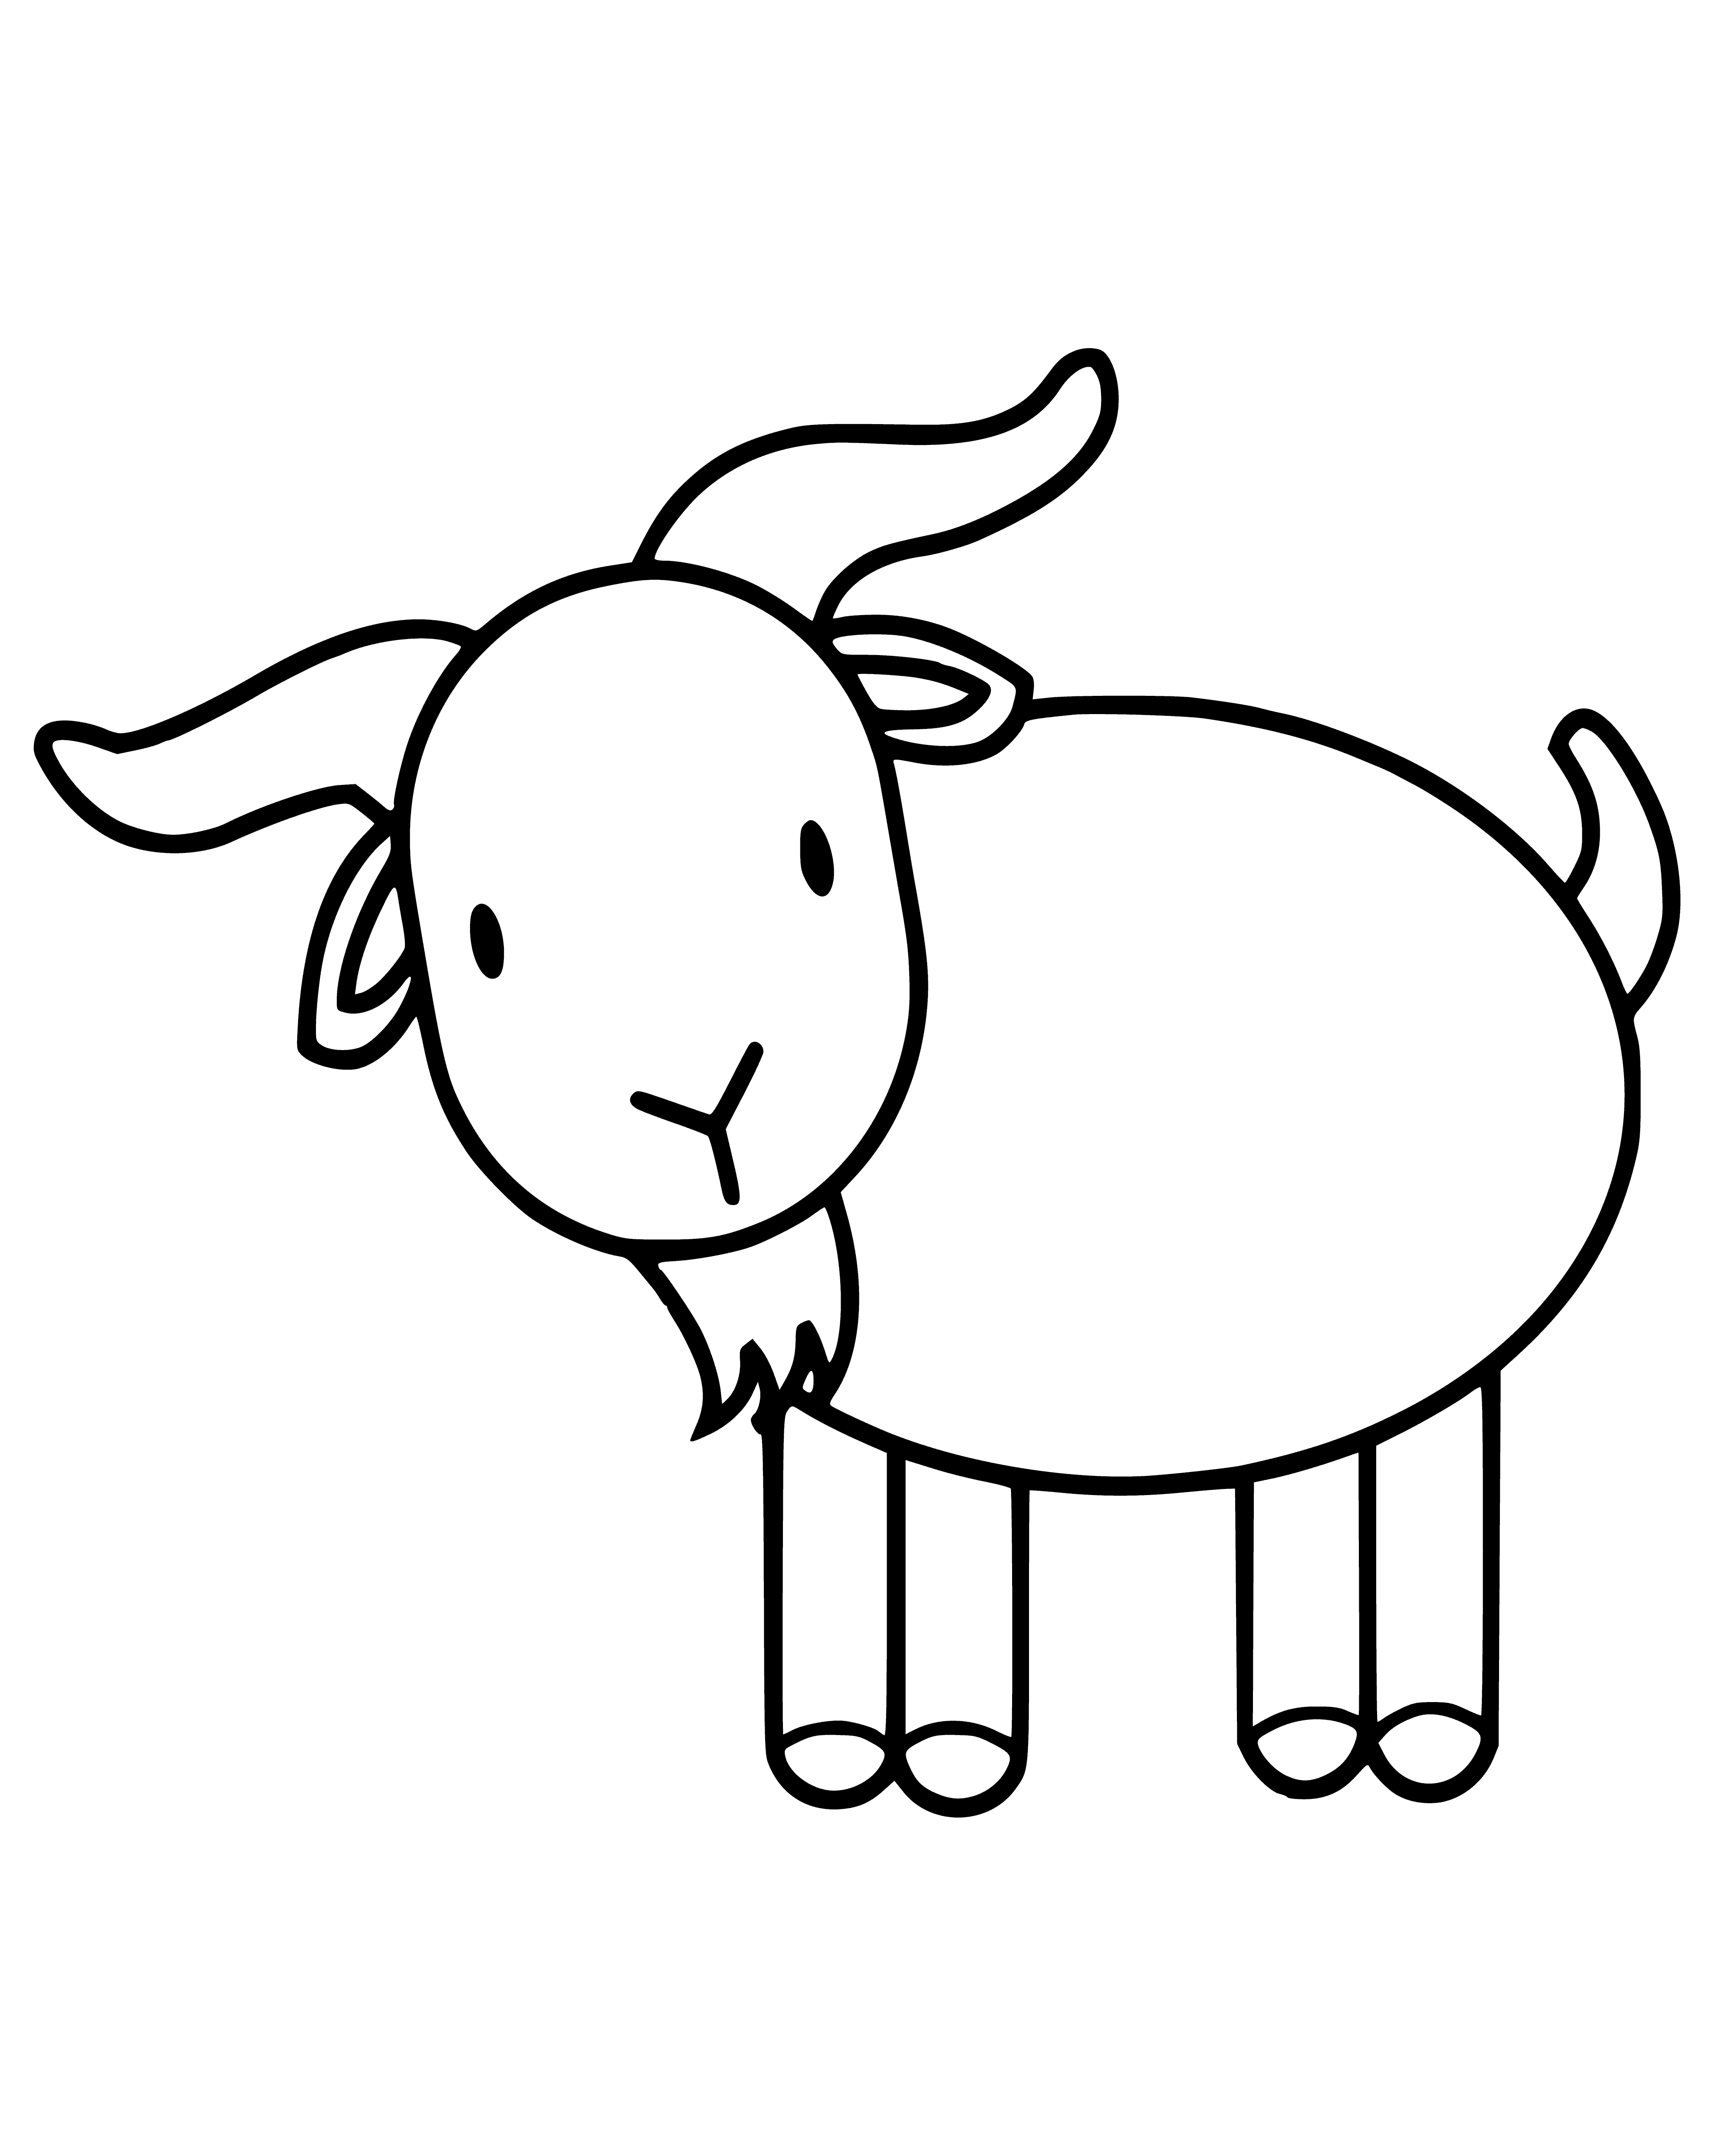 coloring page: Goat is eating while standing on four legs, covered in fur with two horns, two eyes and a nose.